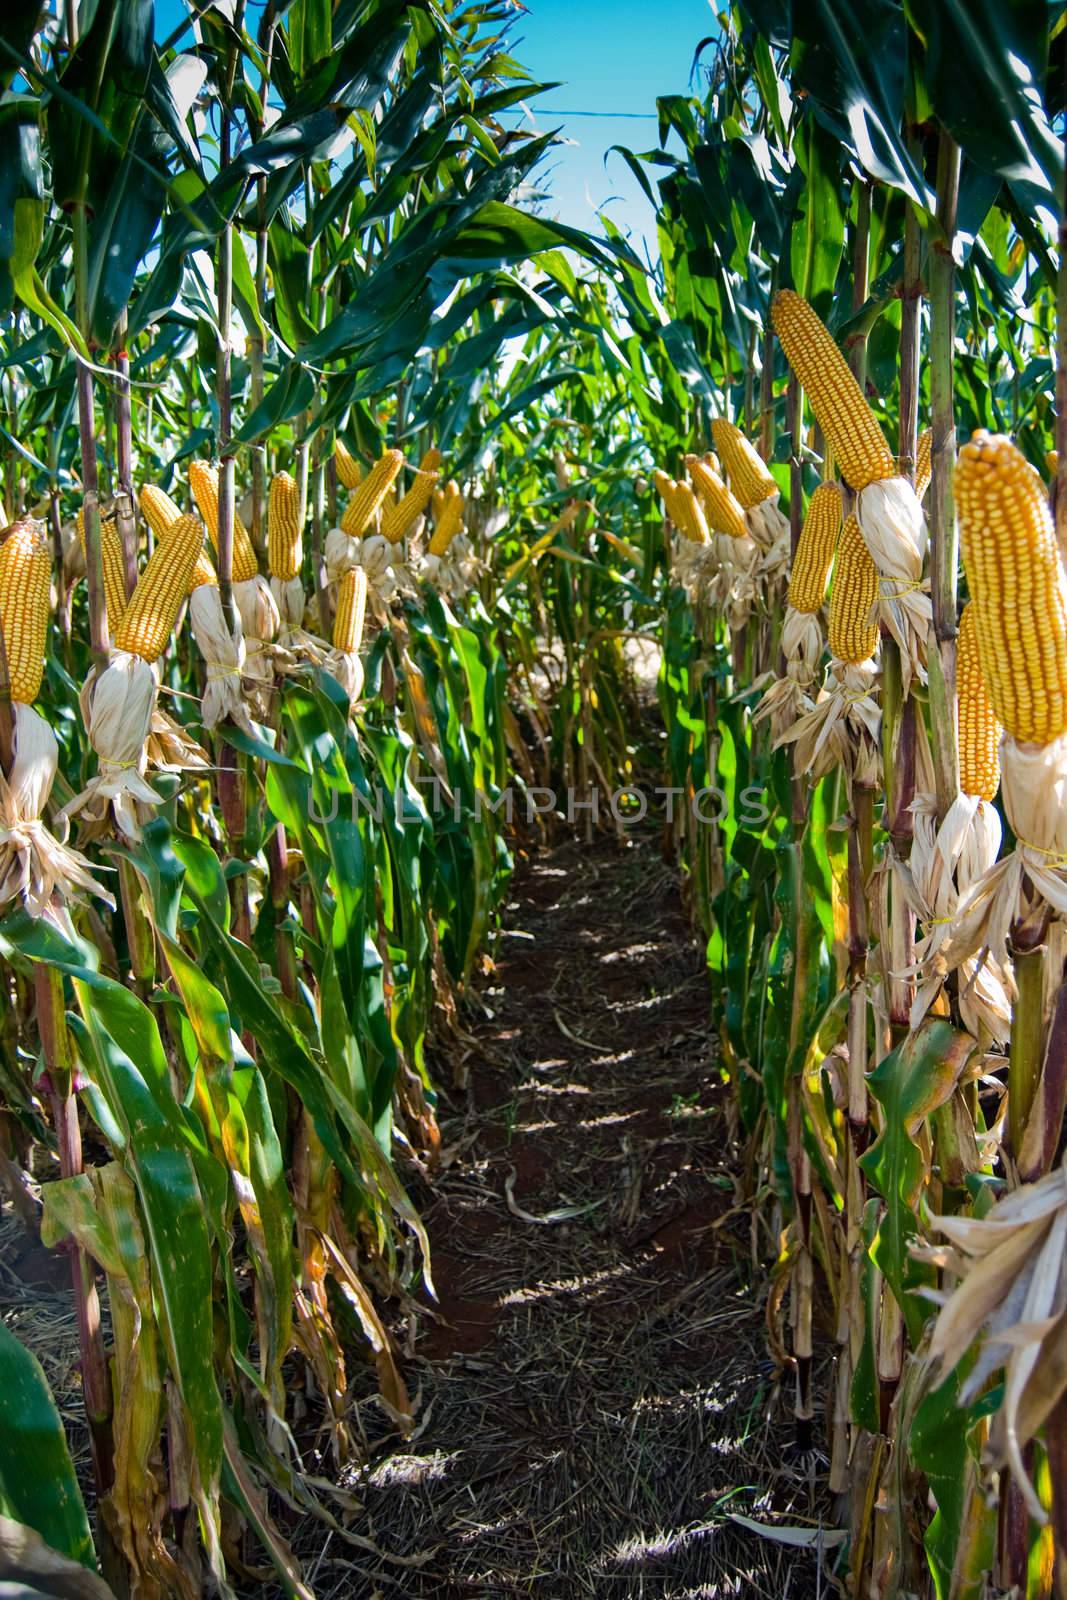 The maize is one known cultivated cereal to a large extent of the world. The maize extensively is used as human food or animal ration, had to its nutricionais qualities.